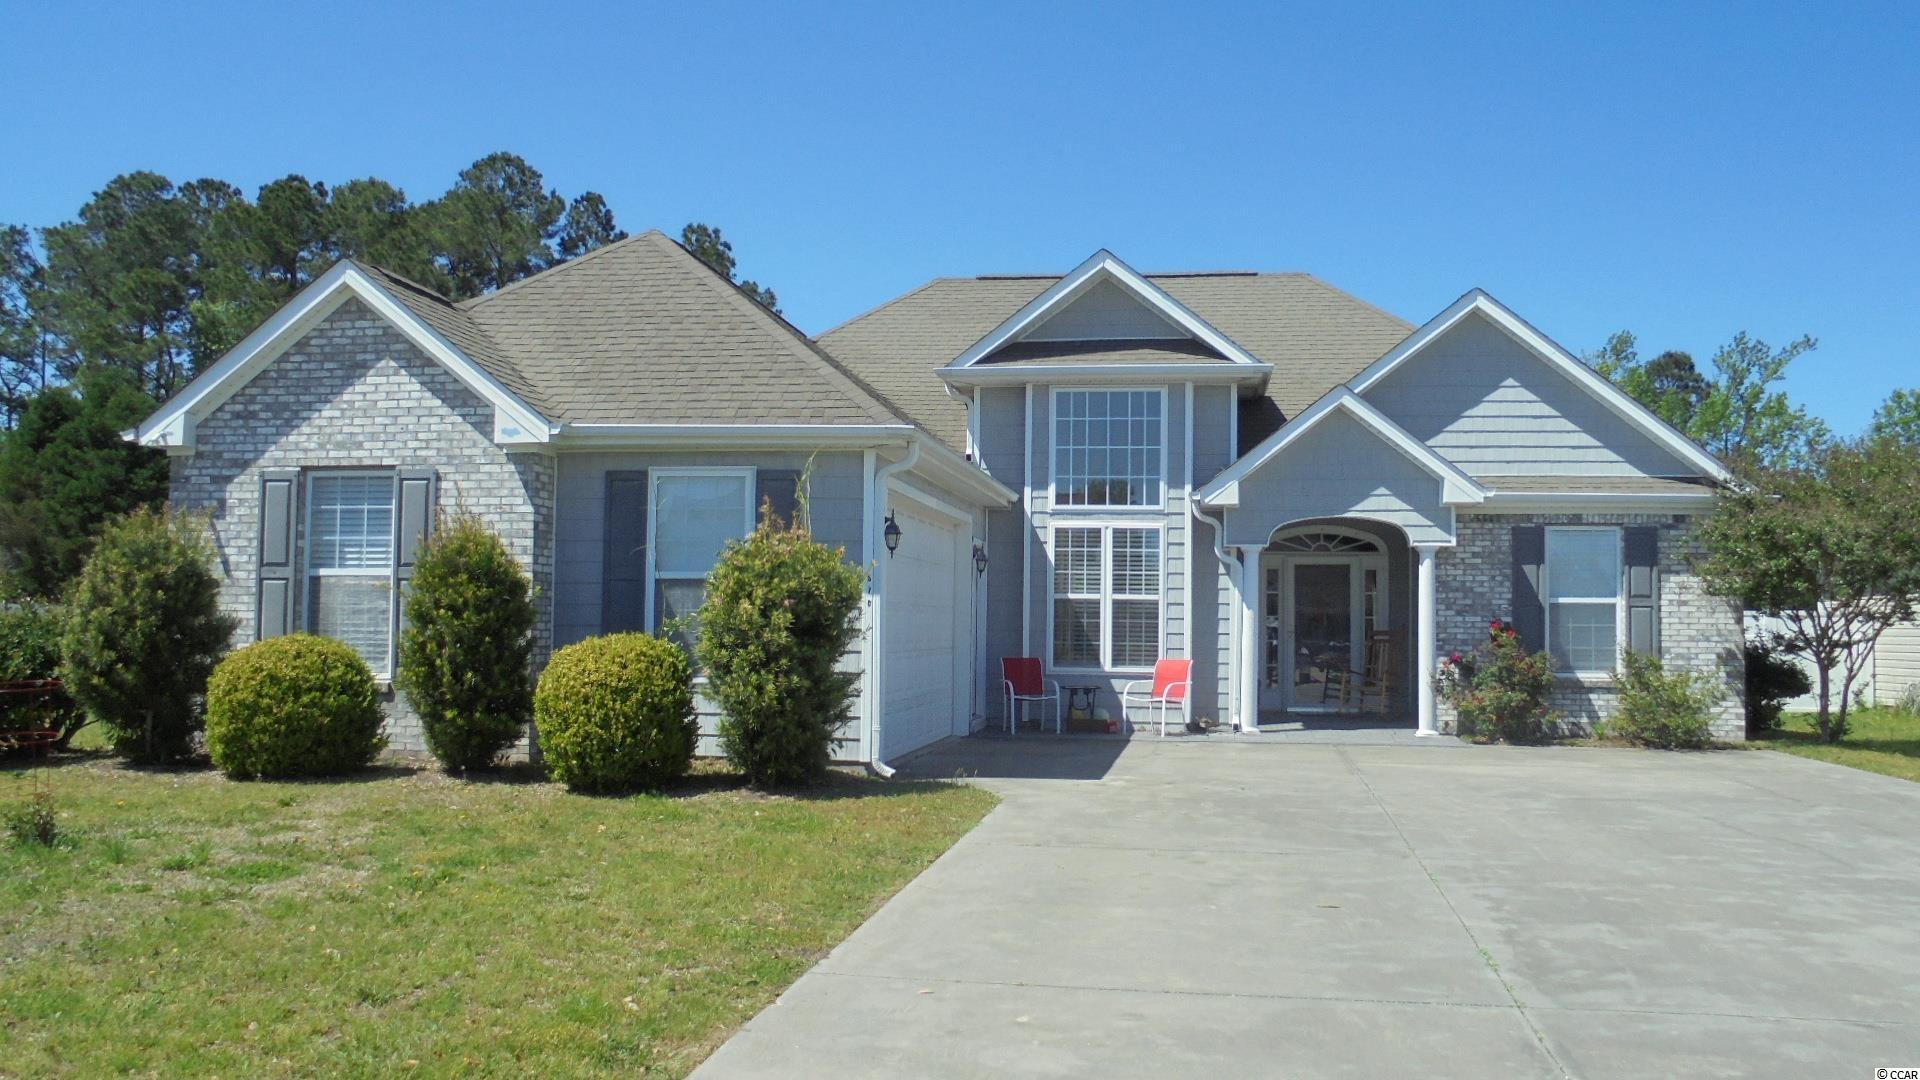 978 University Forest Dr., Conway, SC 29526